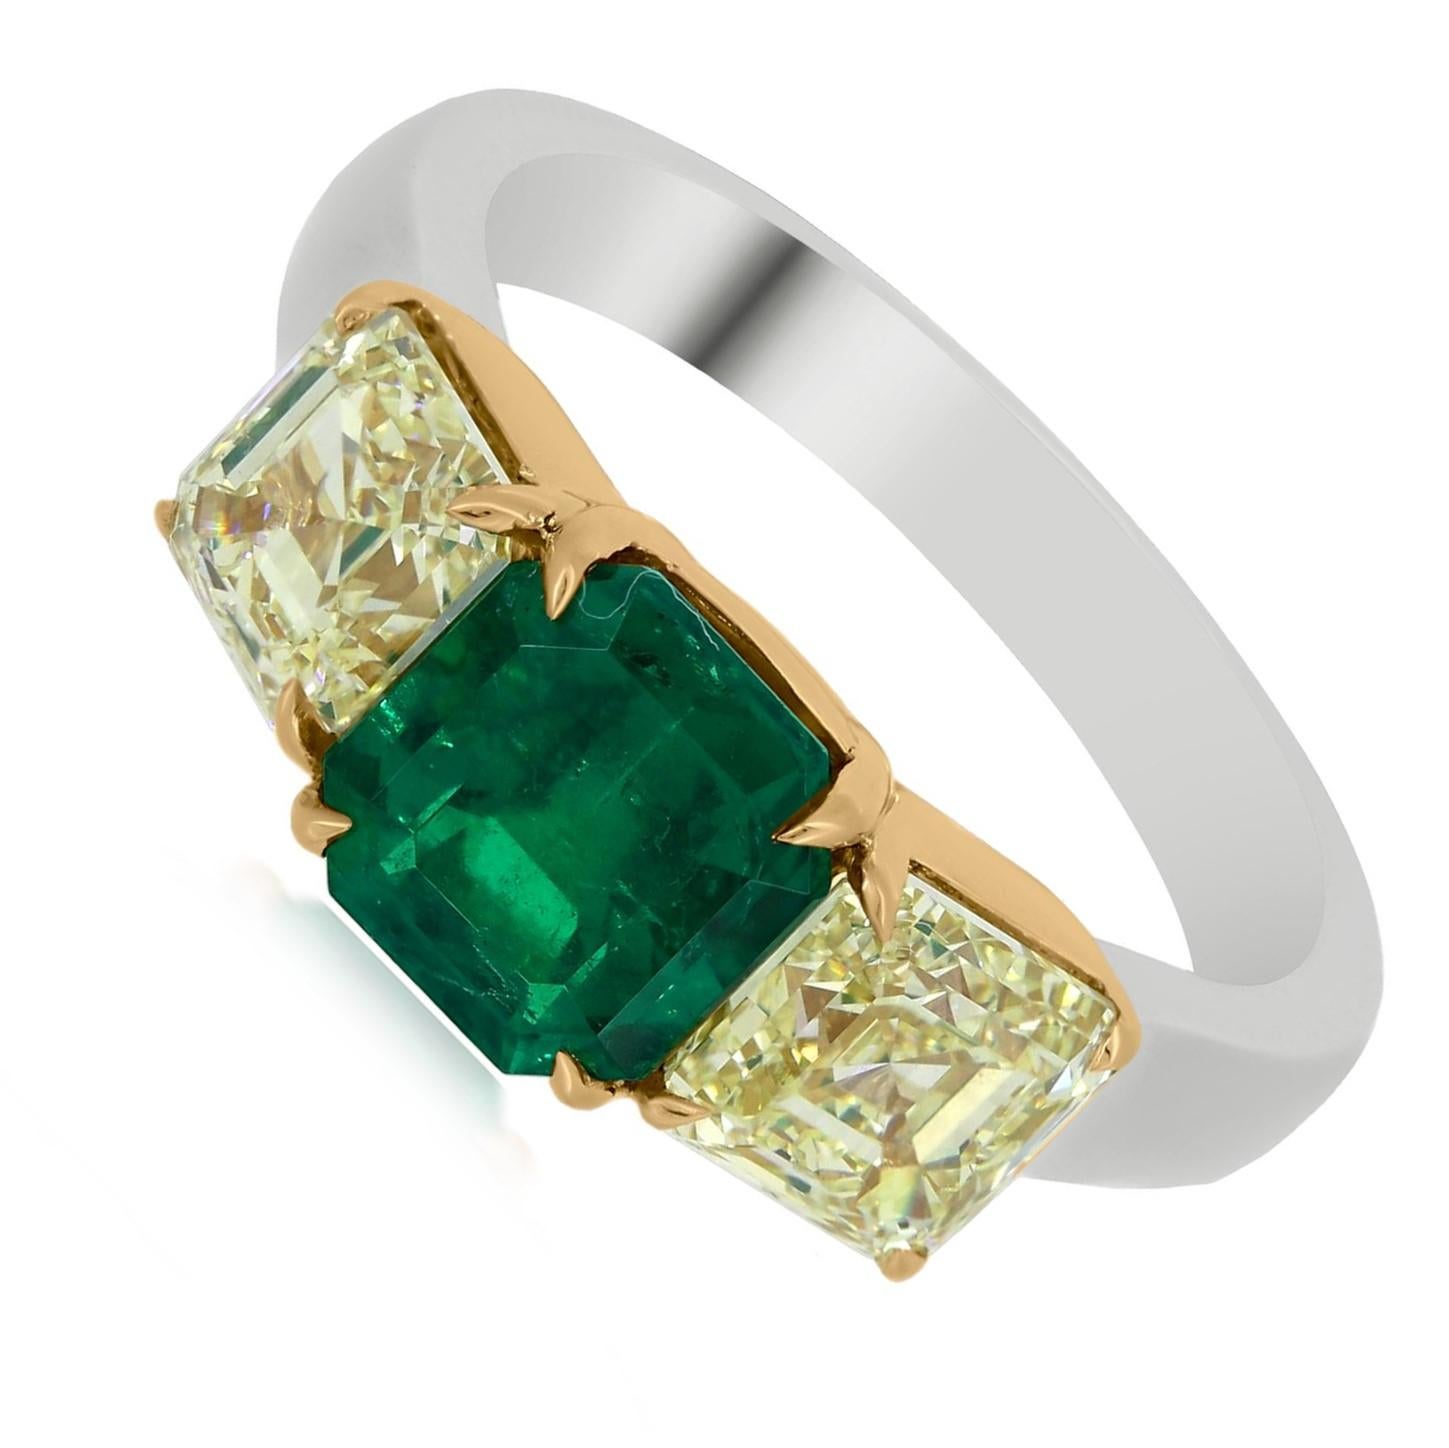 This Nigaam three stone ring in 18k white and yellow gold features an octagon- cut 1.85 carat Emerald Colombian at the center flanked by two 2.49 ct. t.w. square yellow diamonds prong set in yellow gold over the white gold band. 

Please follow the